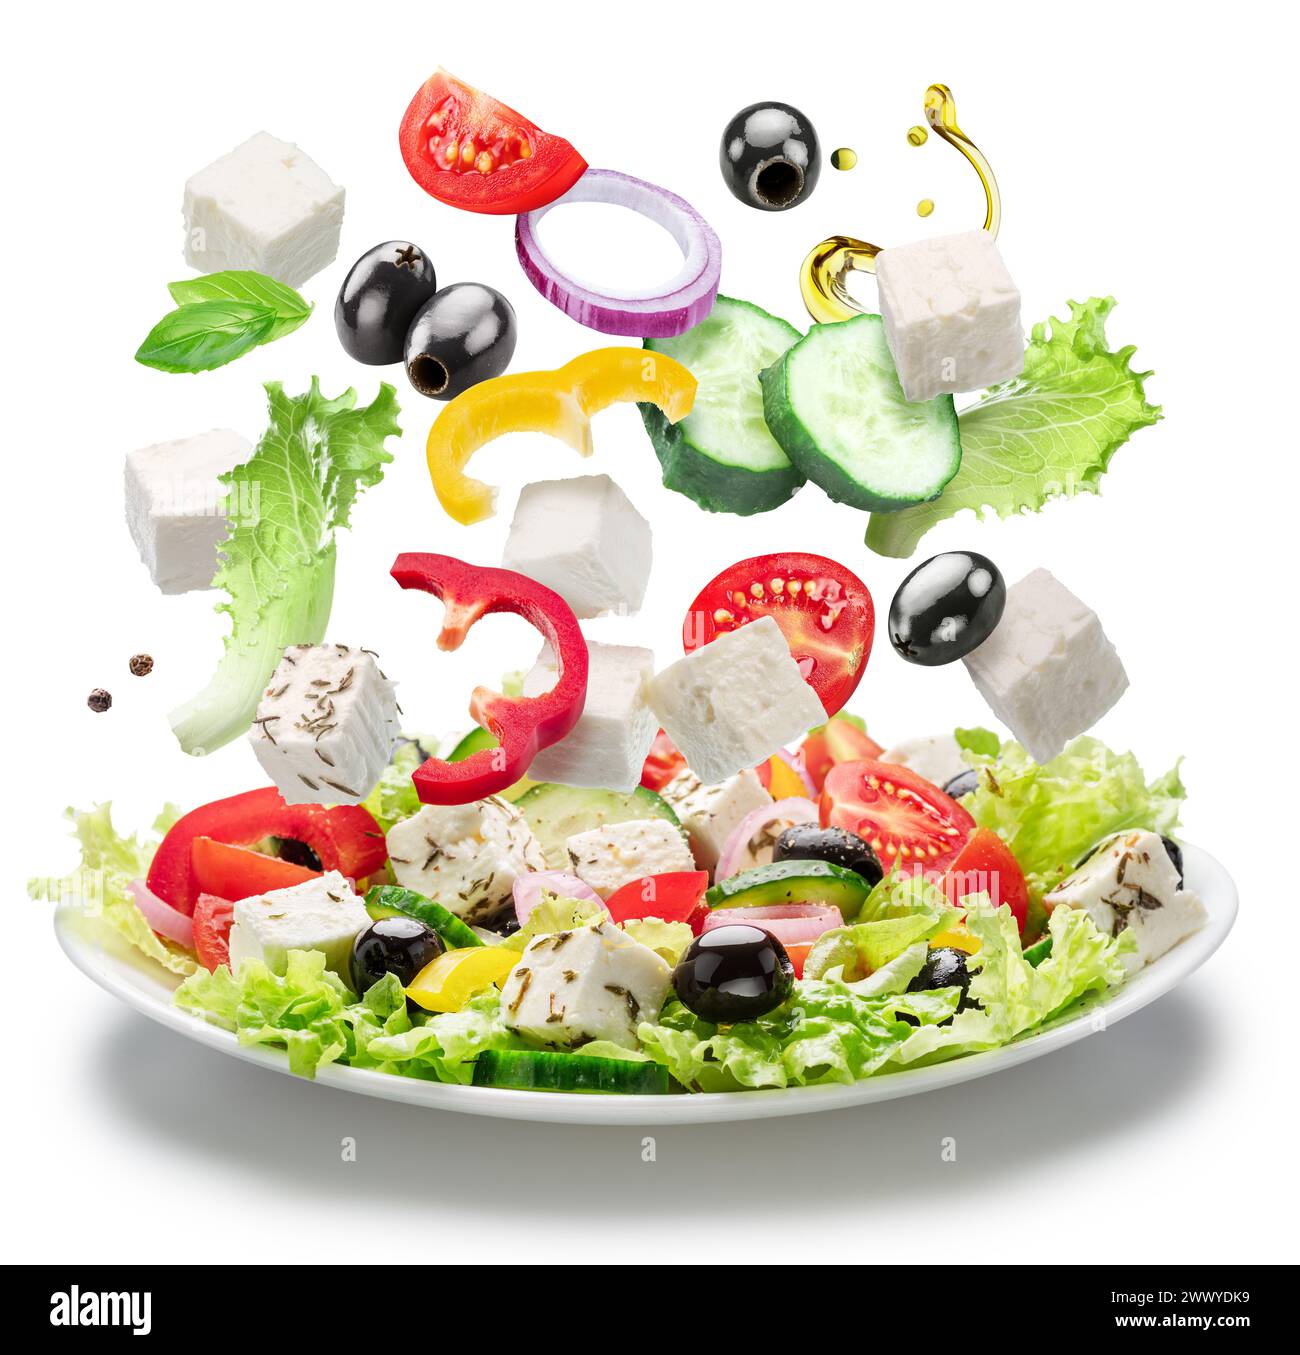 Fresh vegetables and feta cheese falling down into the white plate isolated. File contains clipping paths. Stock Photo